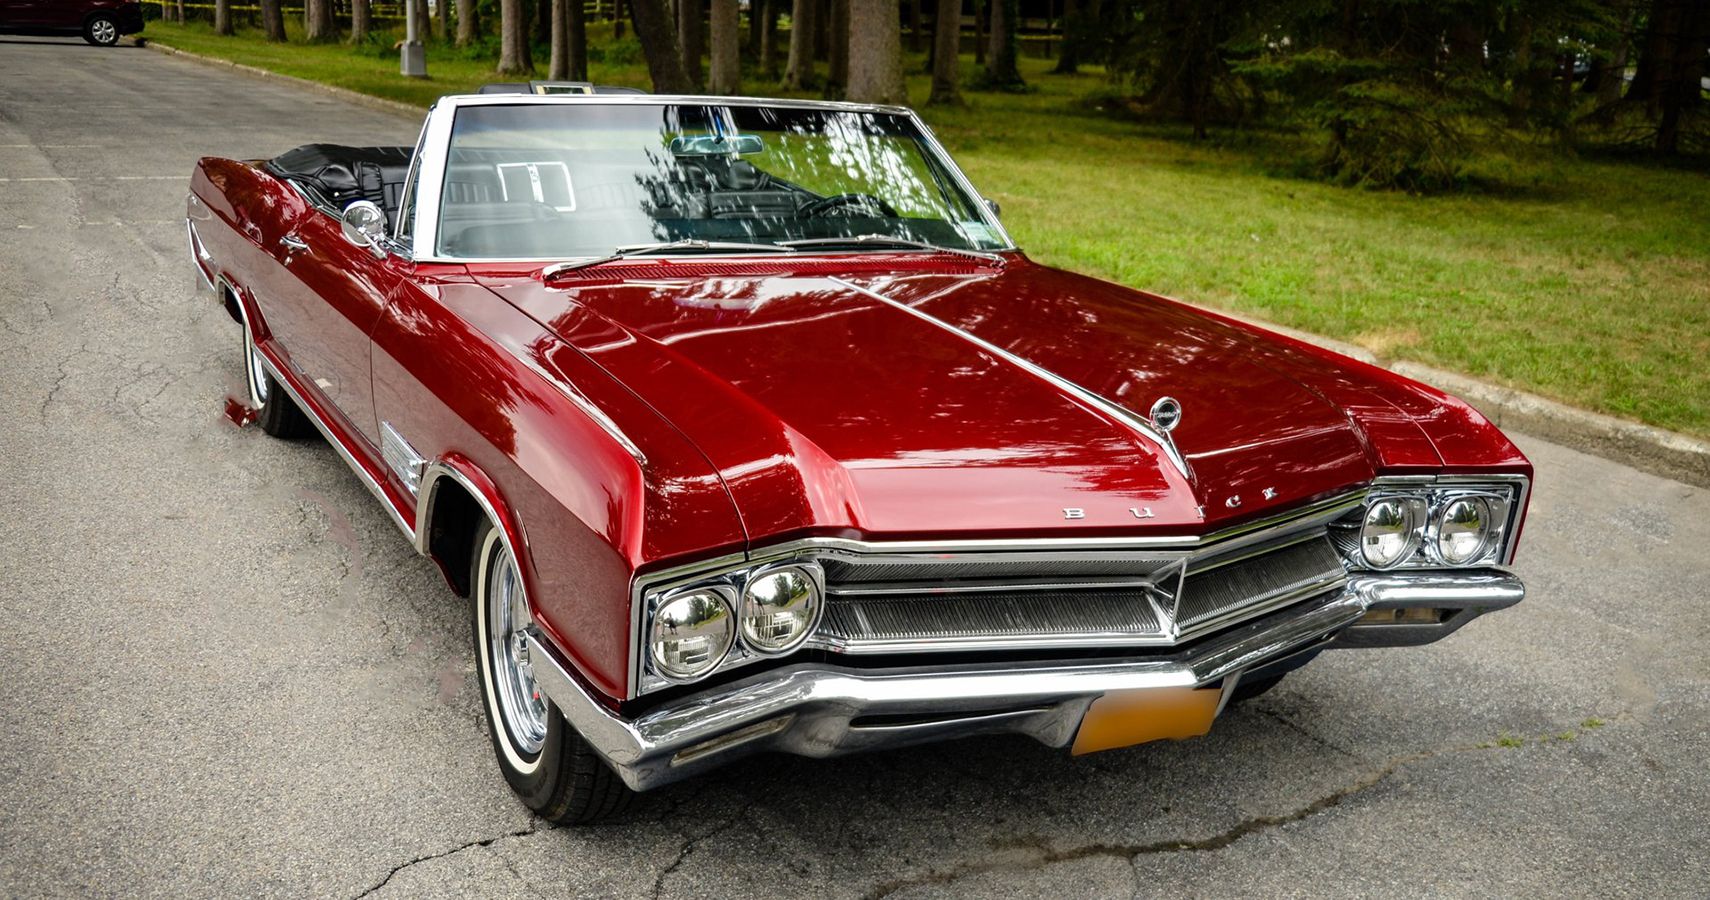 10 Things You Need To Know Before Buying A Buick Wildcat